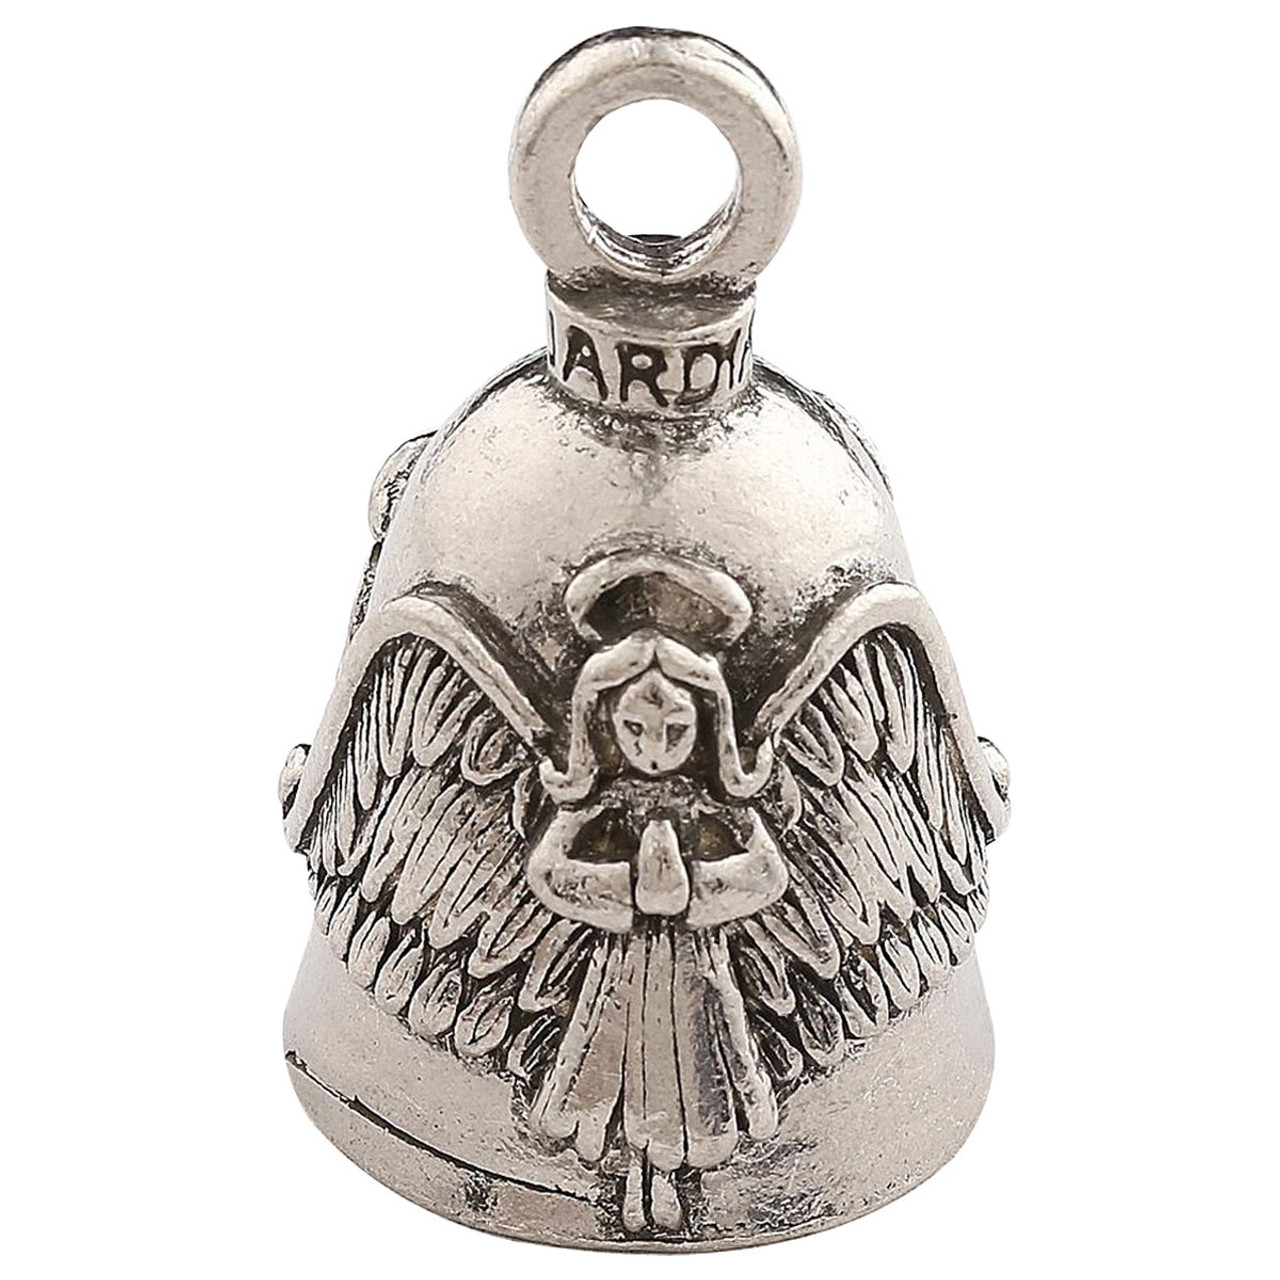 What is a Guardian Bell for a Motorcycle?